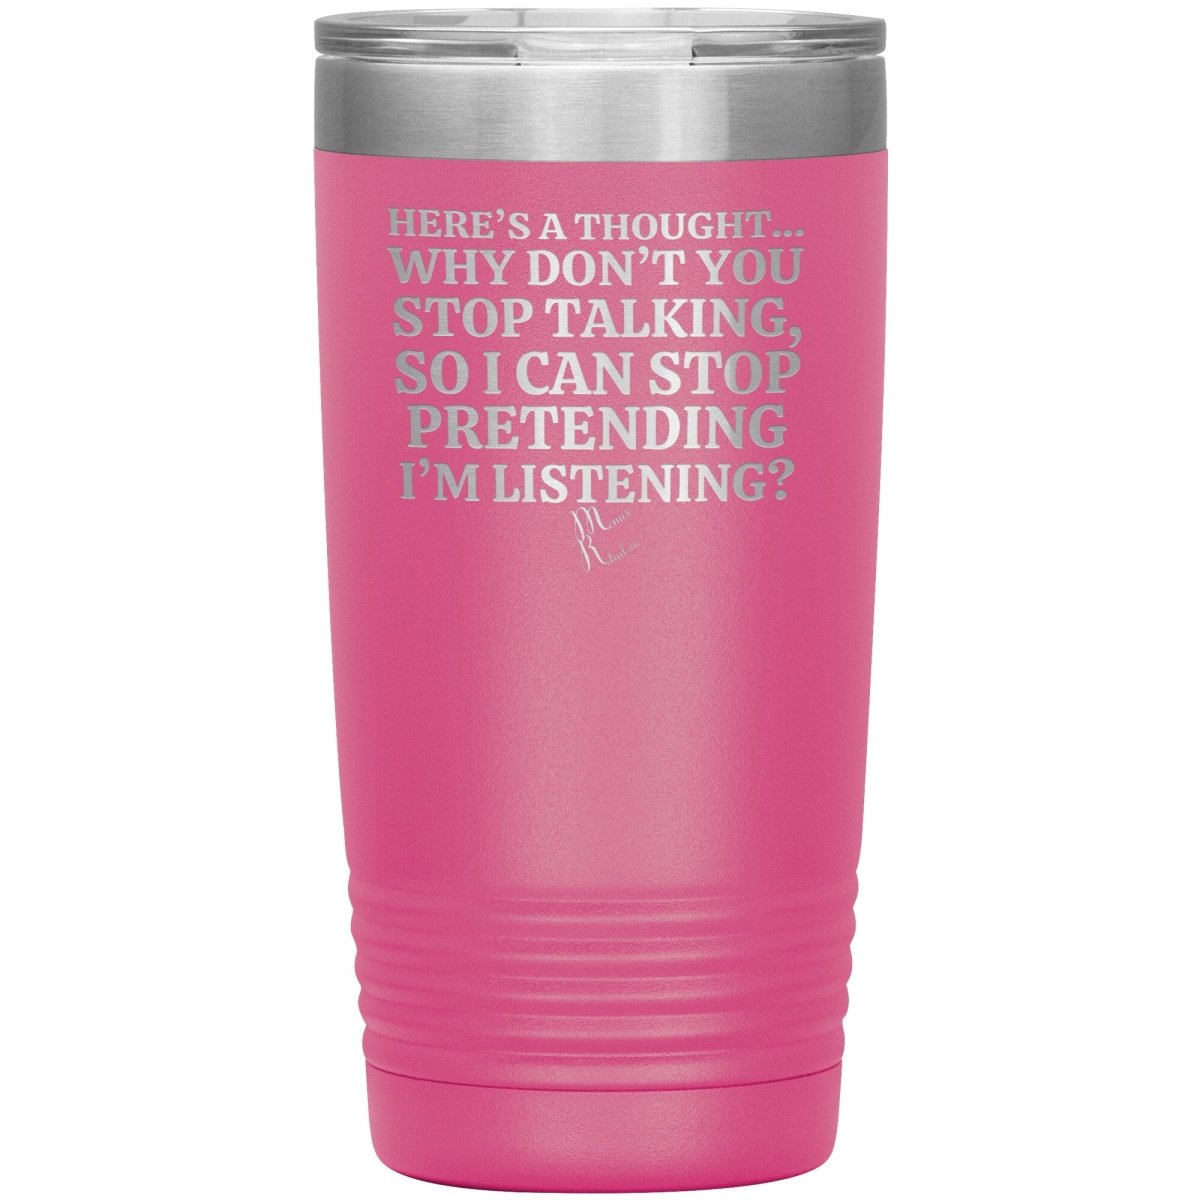 Here's A Thought...Why Don't You Stop Talking Tumblers, 20oz Insulated Tumbler / Pink - MemesRetail.com